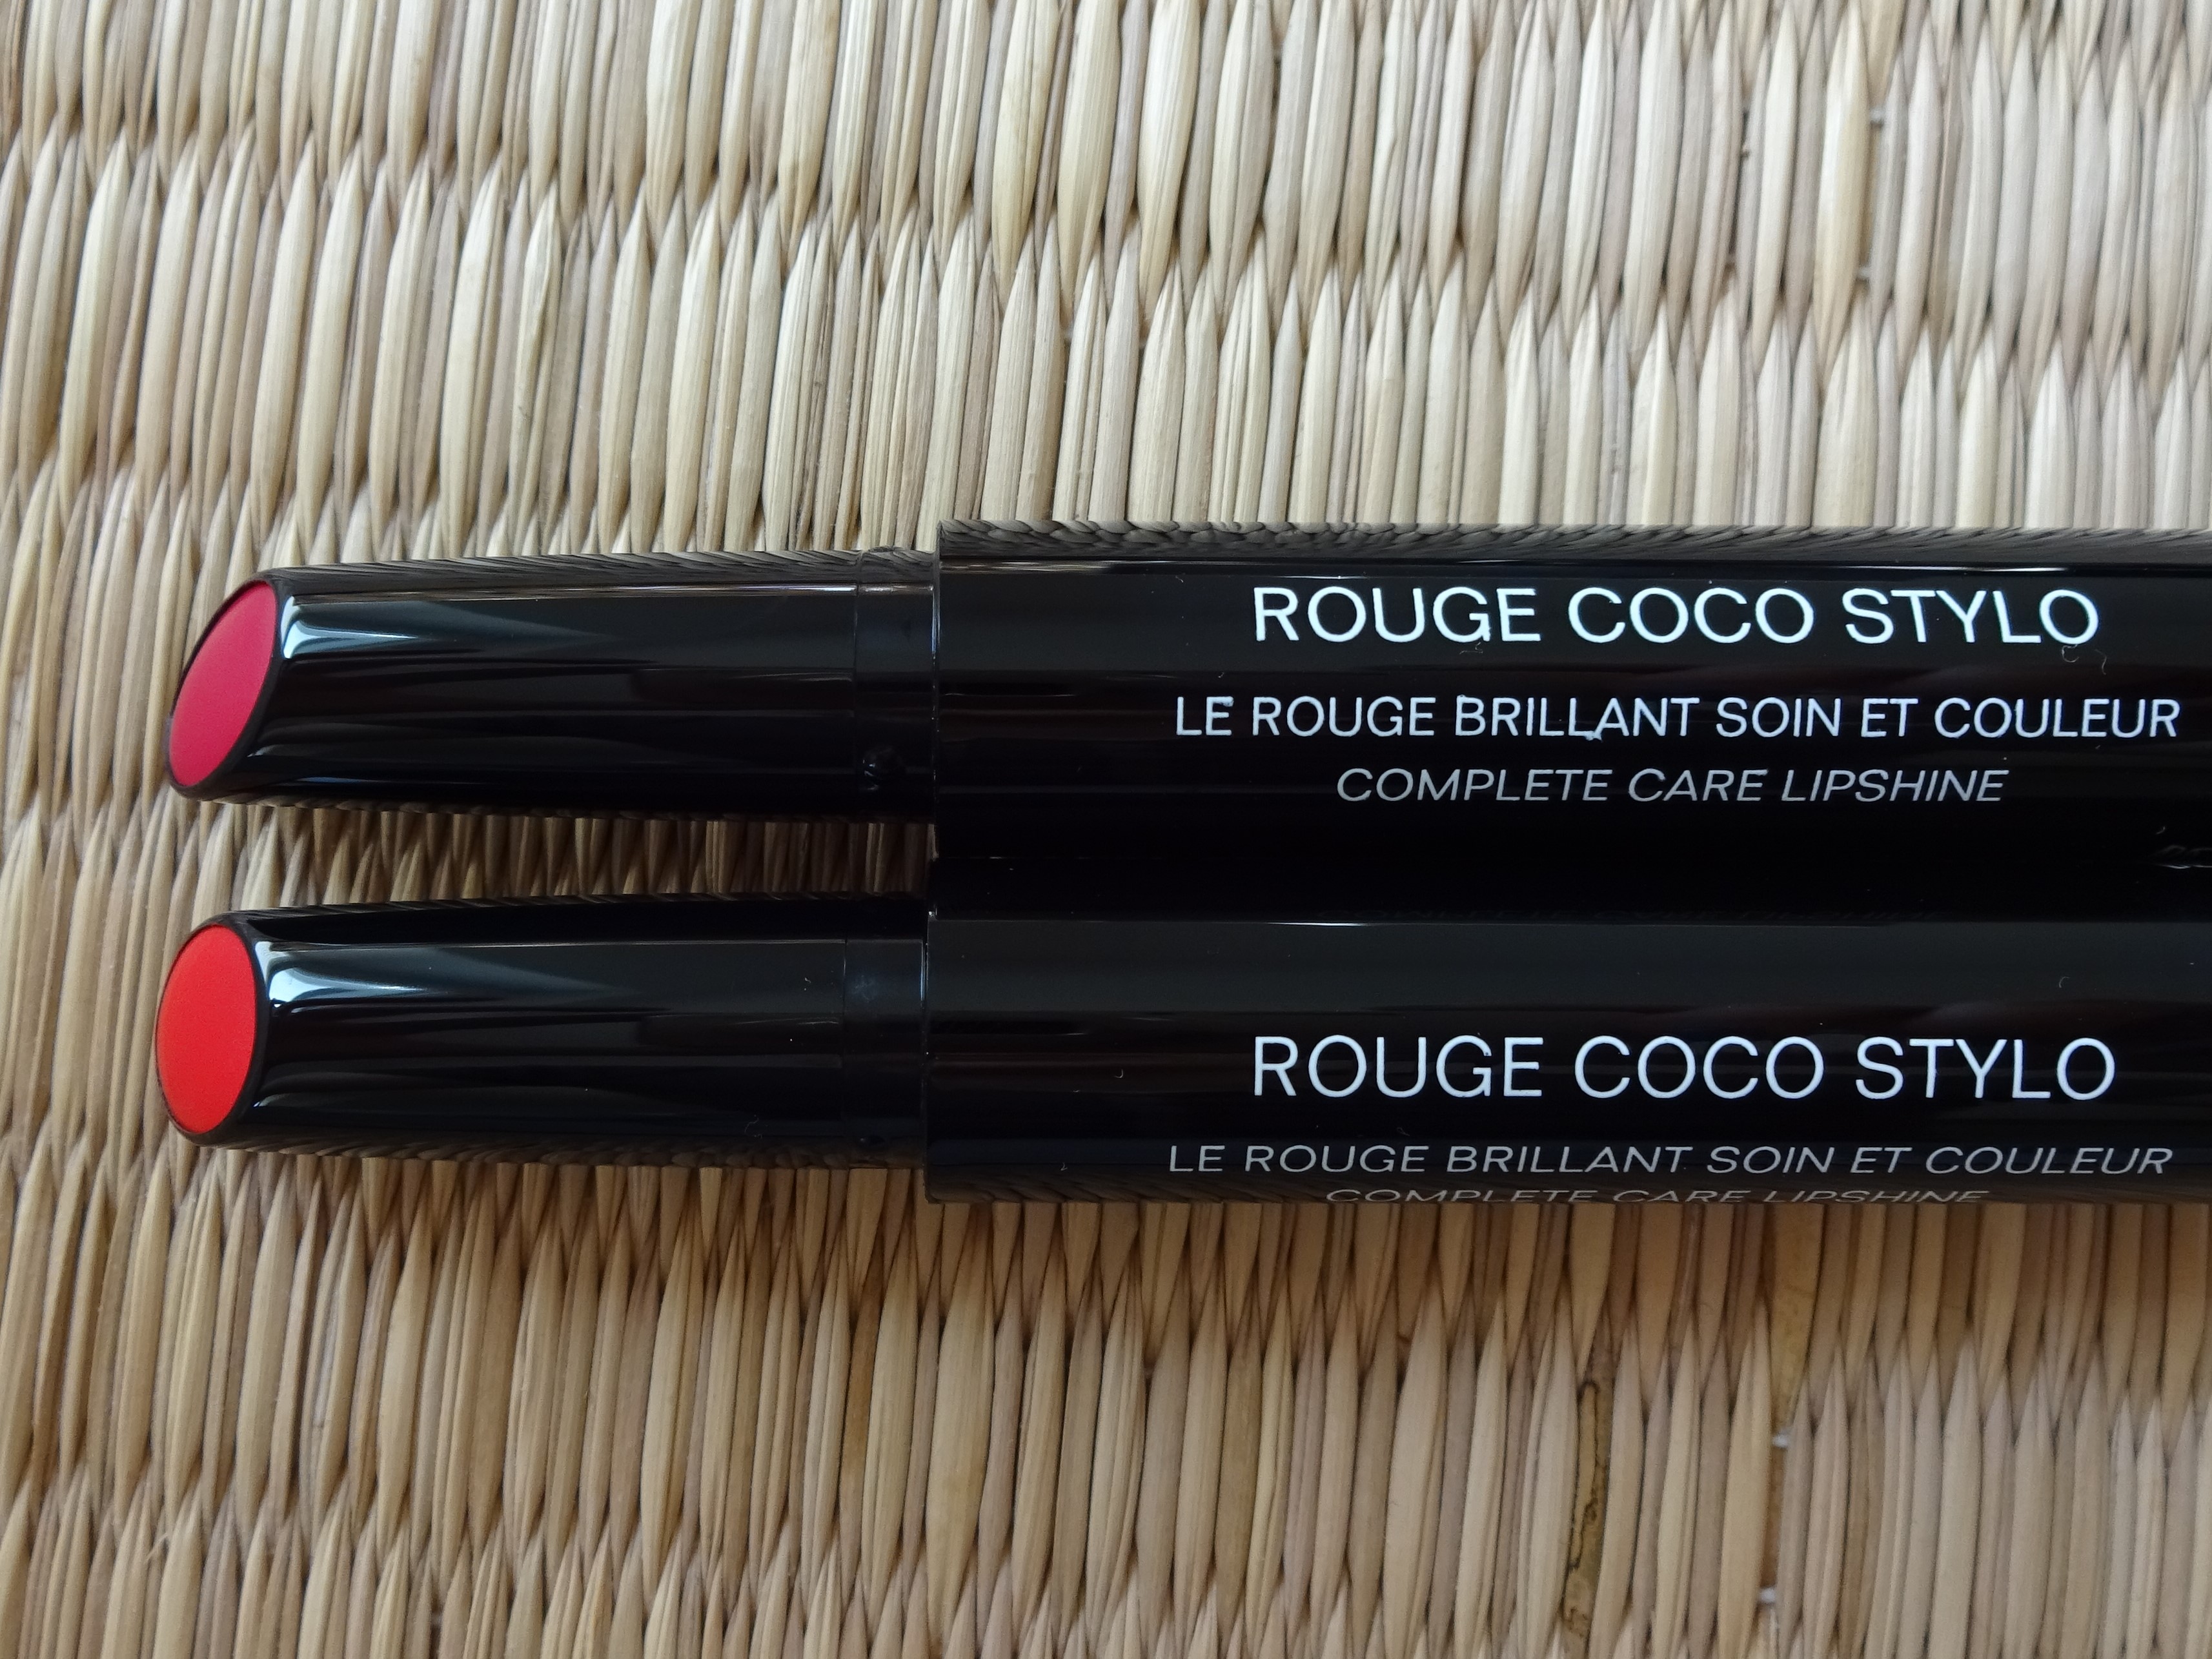 Chanel Rouge Coco Stylo Histoire and Roman | Dandygal